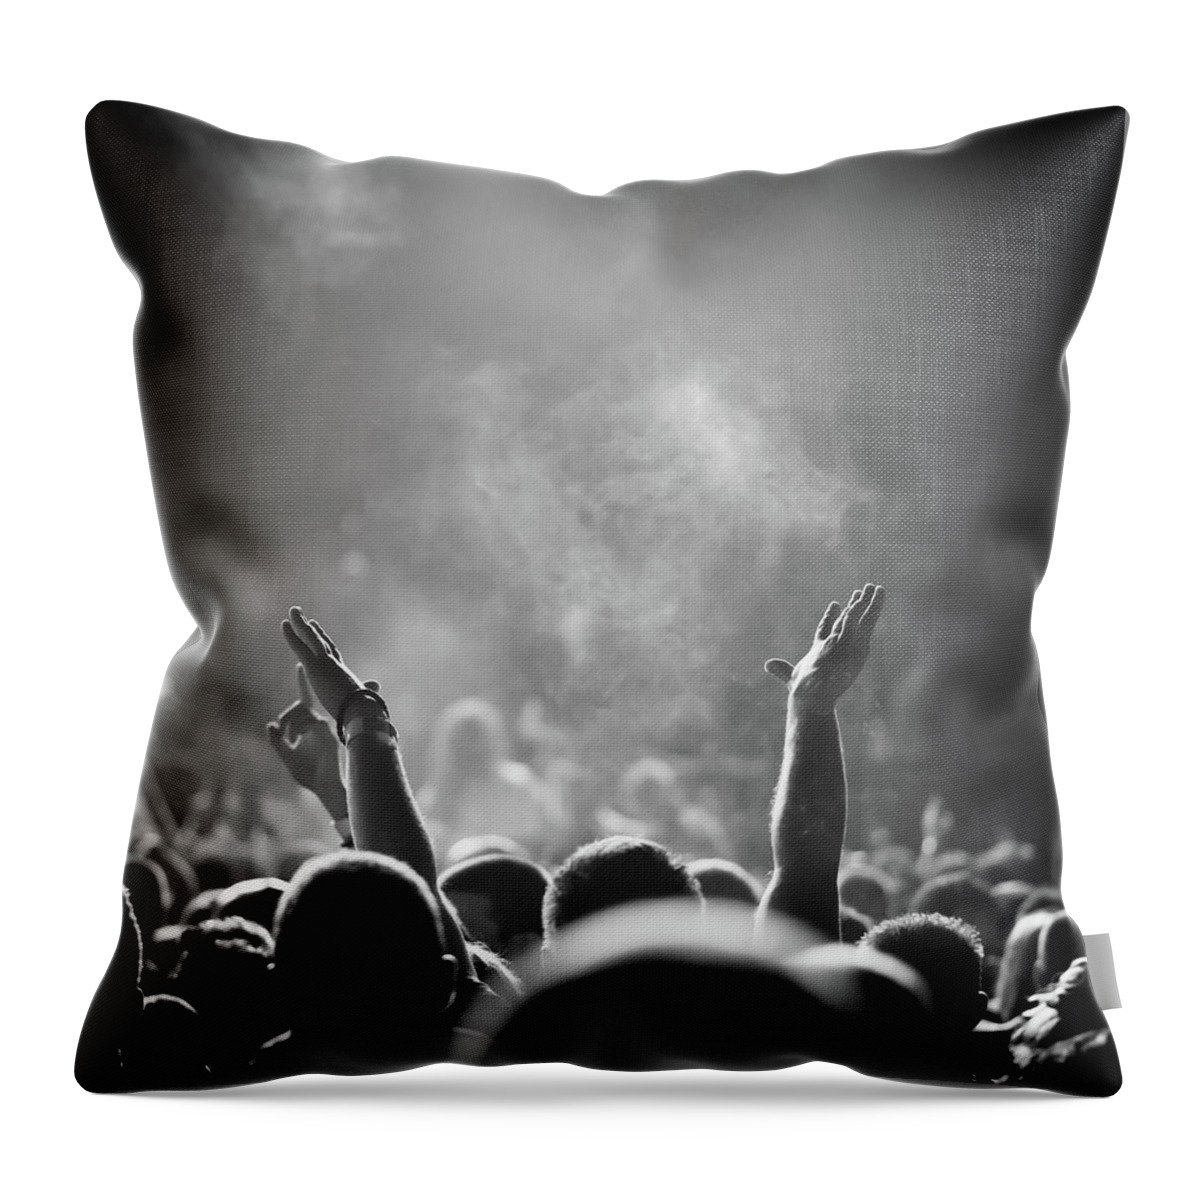 Rock Music Throw Pillow featuring the photograph Popular Music Concert by Alenpopov